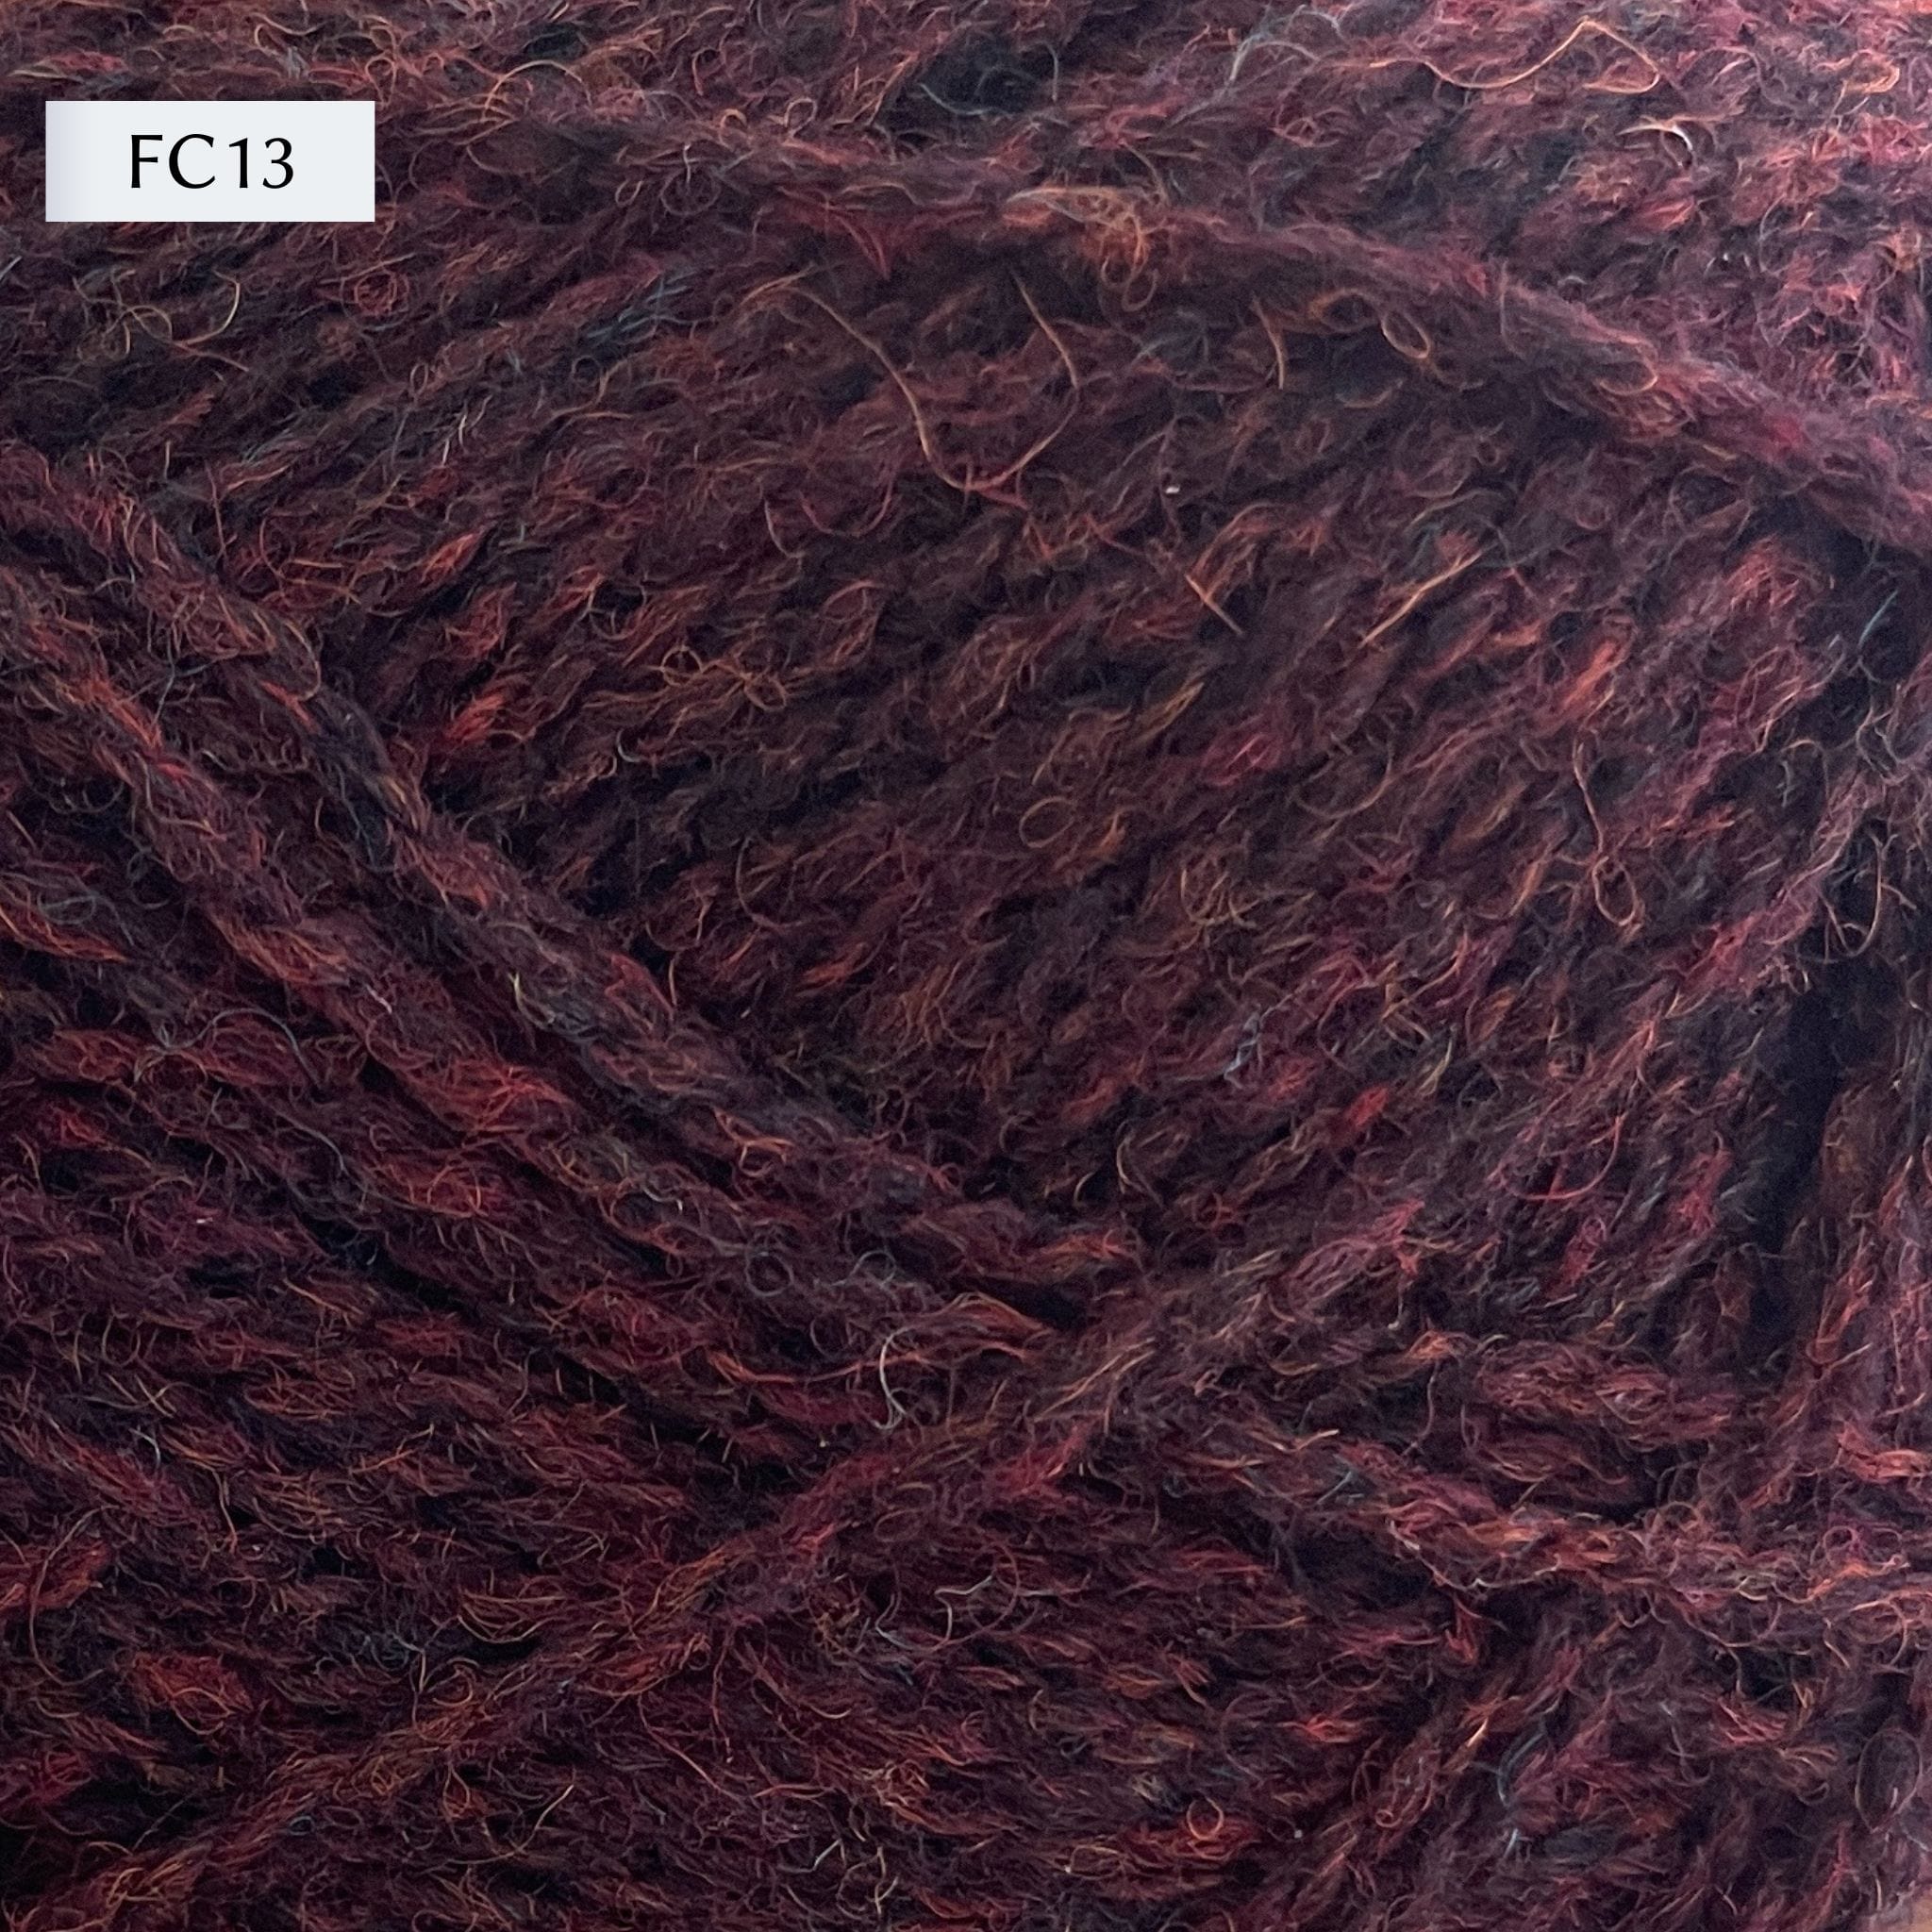 Jamieson & Smith 2ply Jumper Weight, light fingering weight yarn, in color FC13, a rich reddish brown